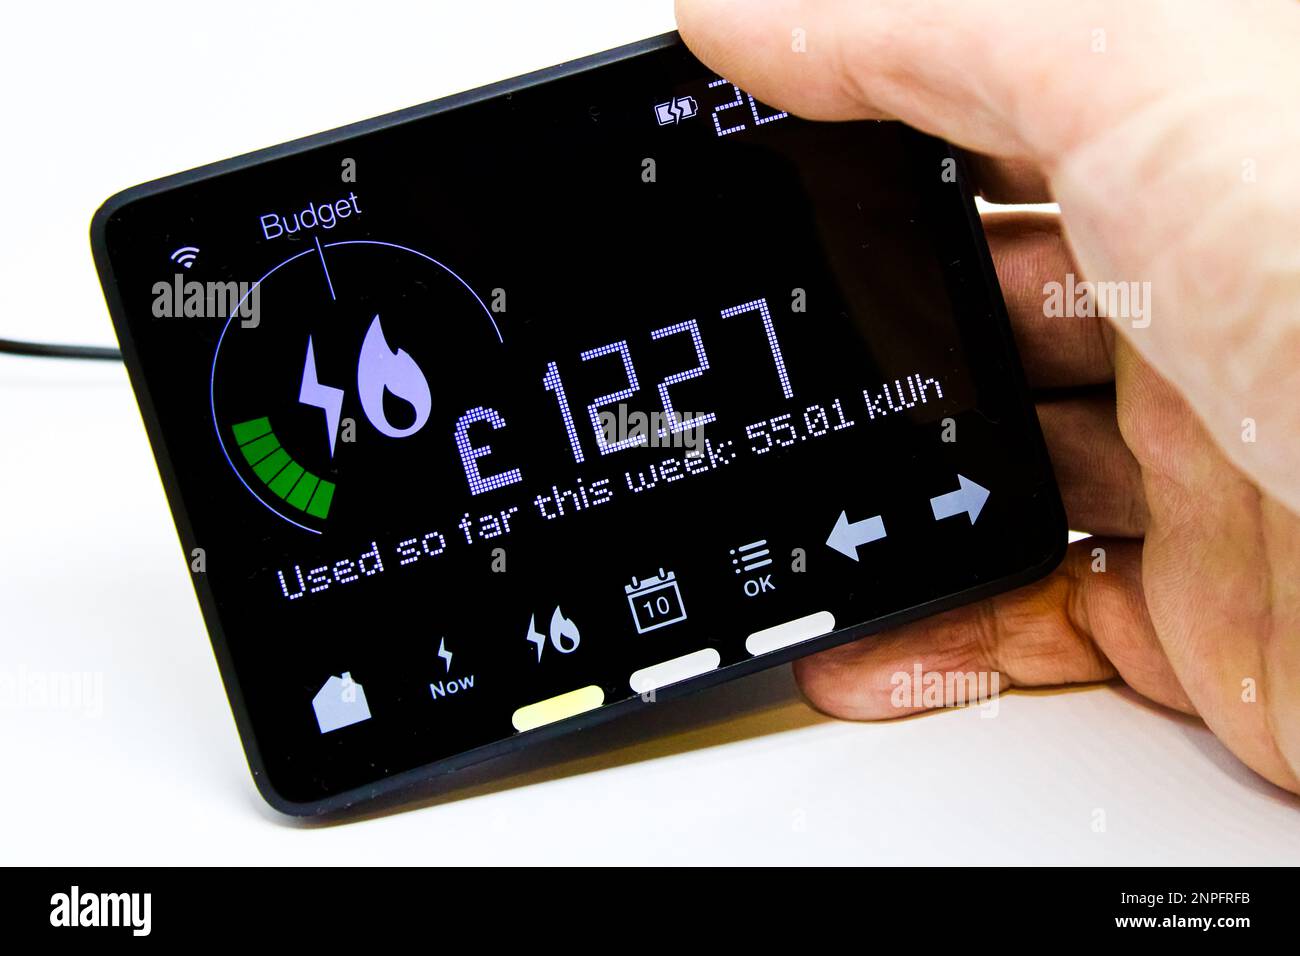 Hand Holding a Smart Meter Monitor Showing Current Week Energy Usage for Gas and Electricity Combined With Cost in Pound Sterling Stock Photo